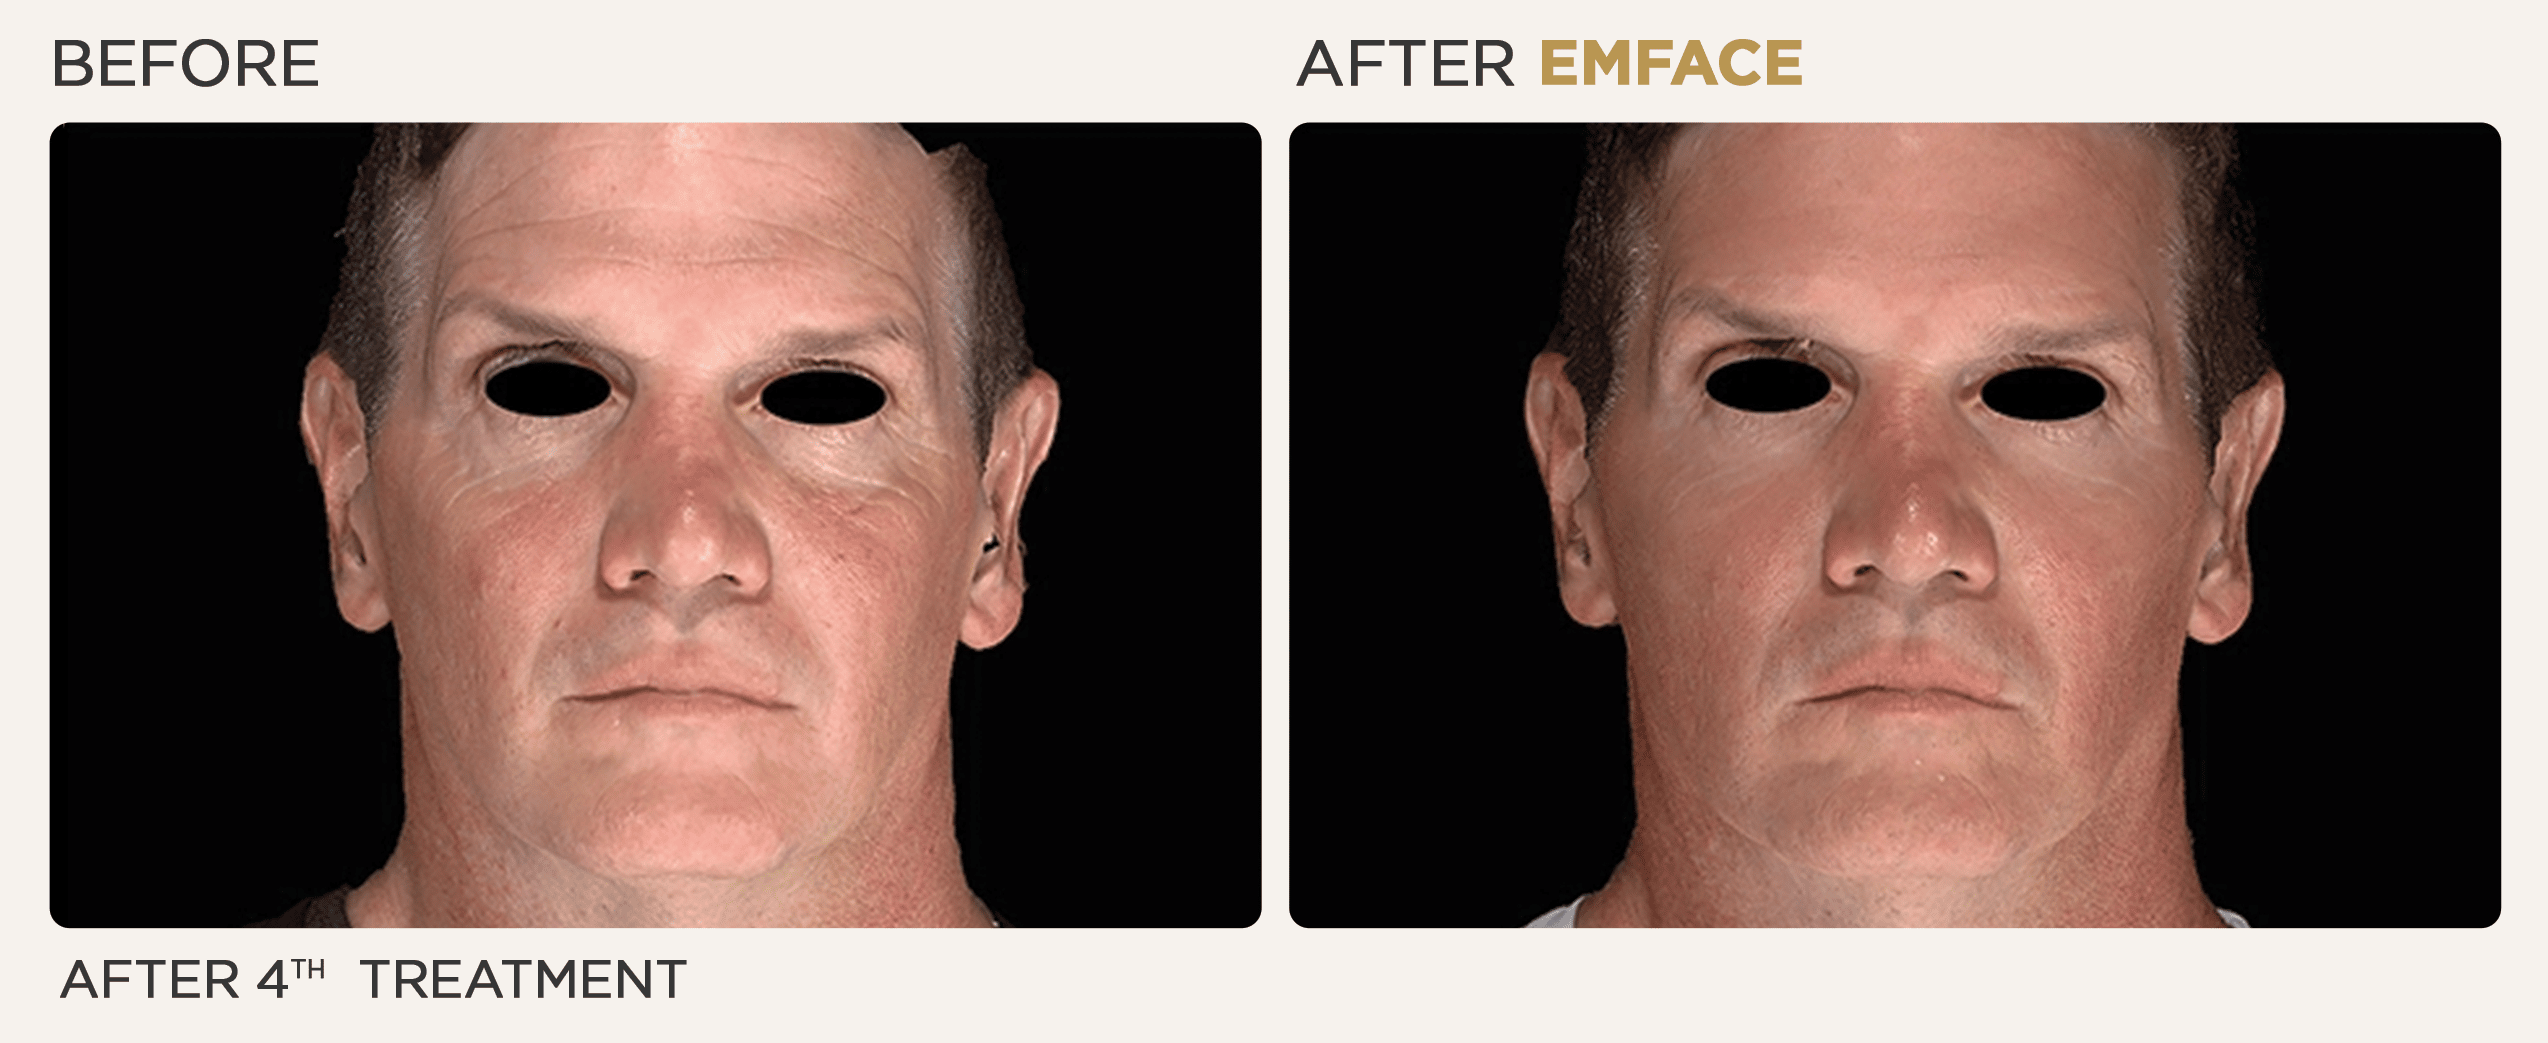 Man's face showing before and after results from EMface treatment at Vitalyc Medspa in Addison.